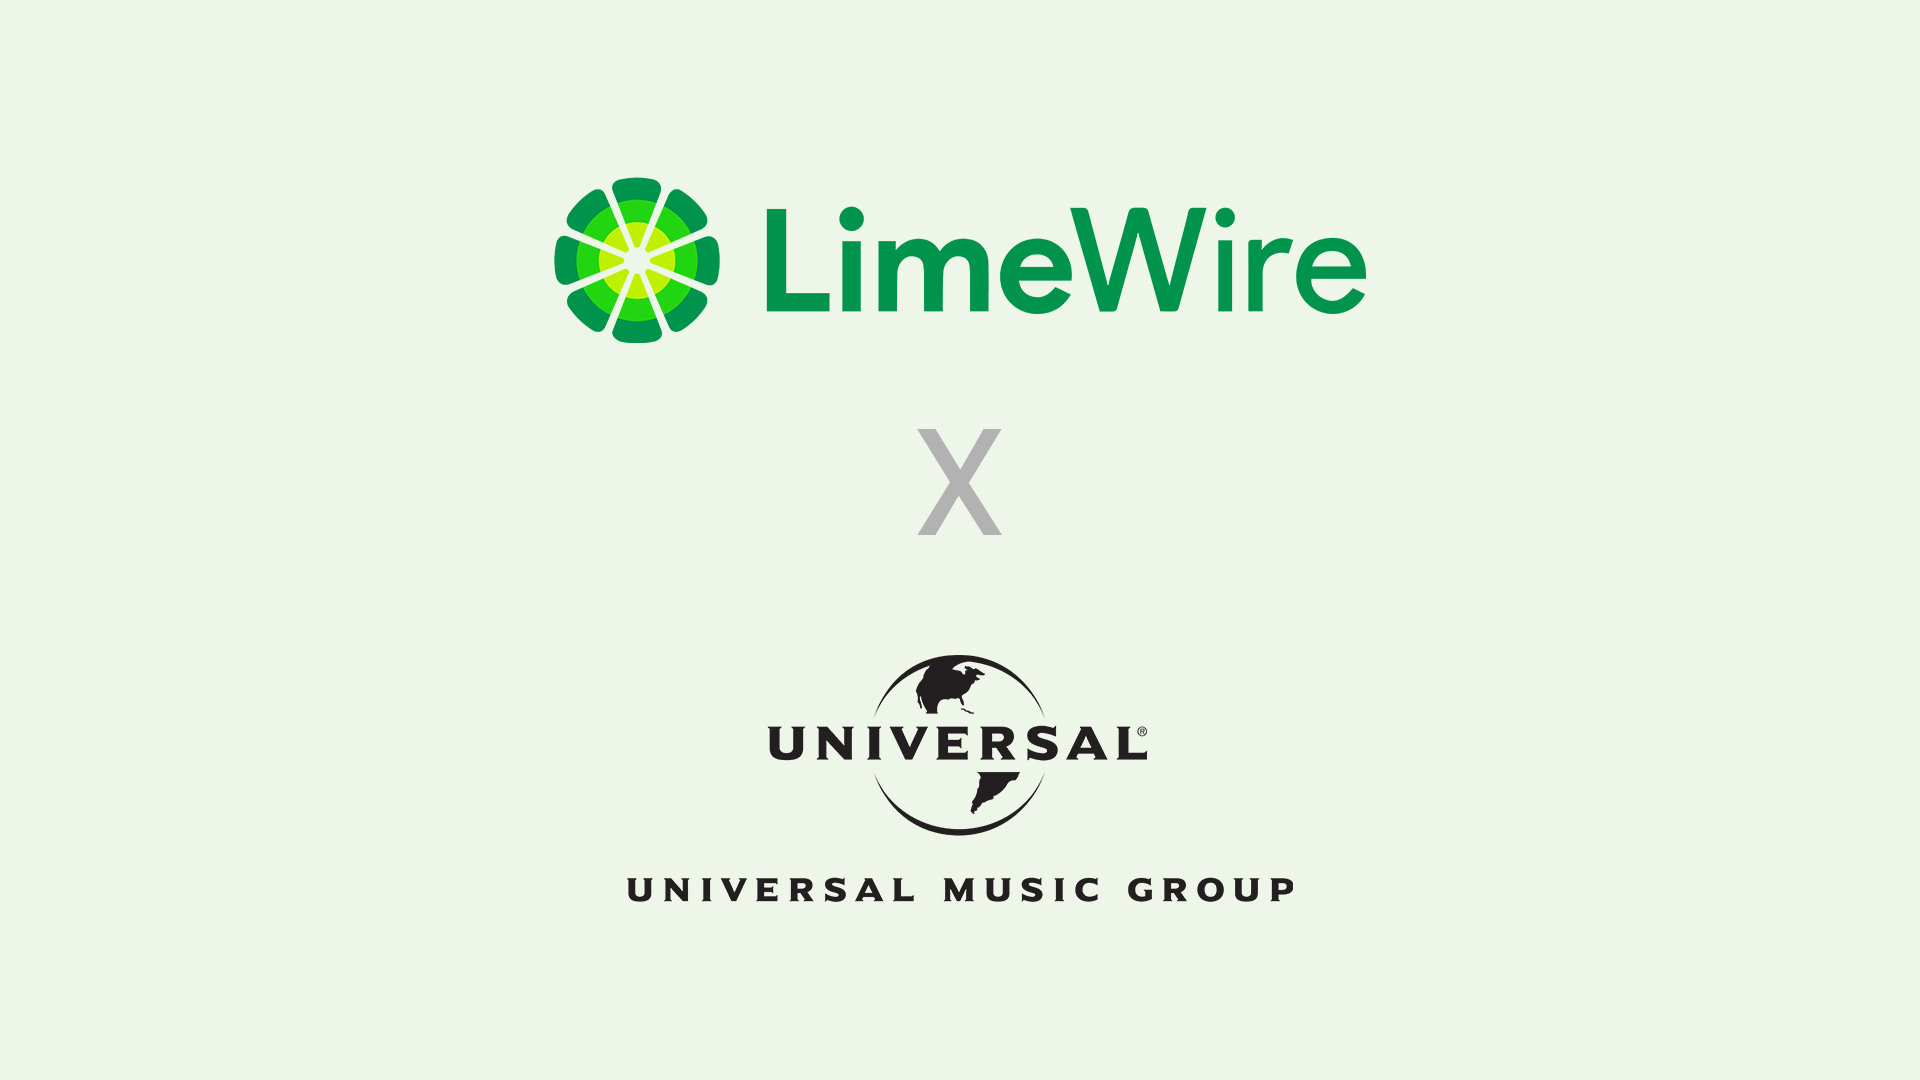 LIMEWIRE STRIKES DEAL WITH UNIVERSAL MUSIC GROUP FOR